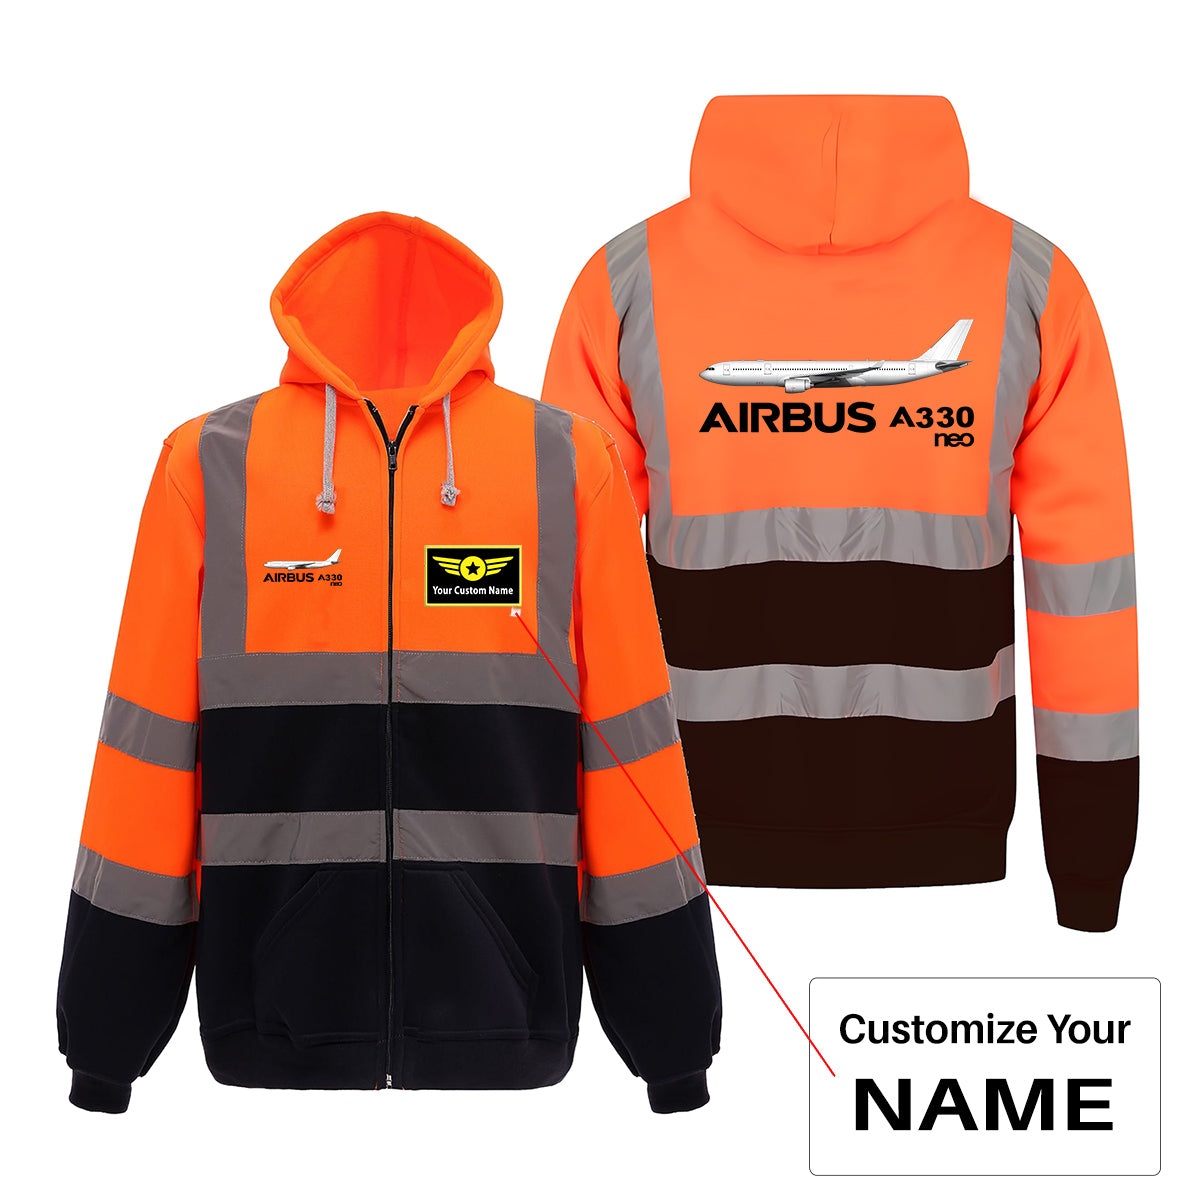 The Airbus A330neo Designed Reflective Zipped Hoodies